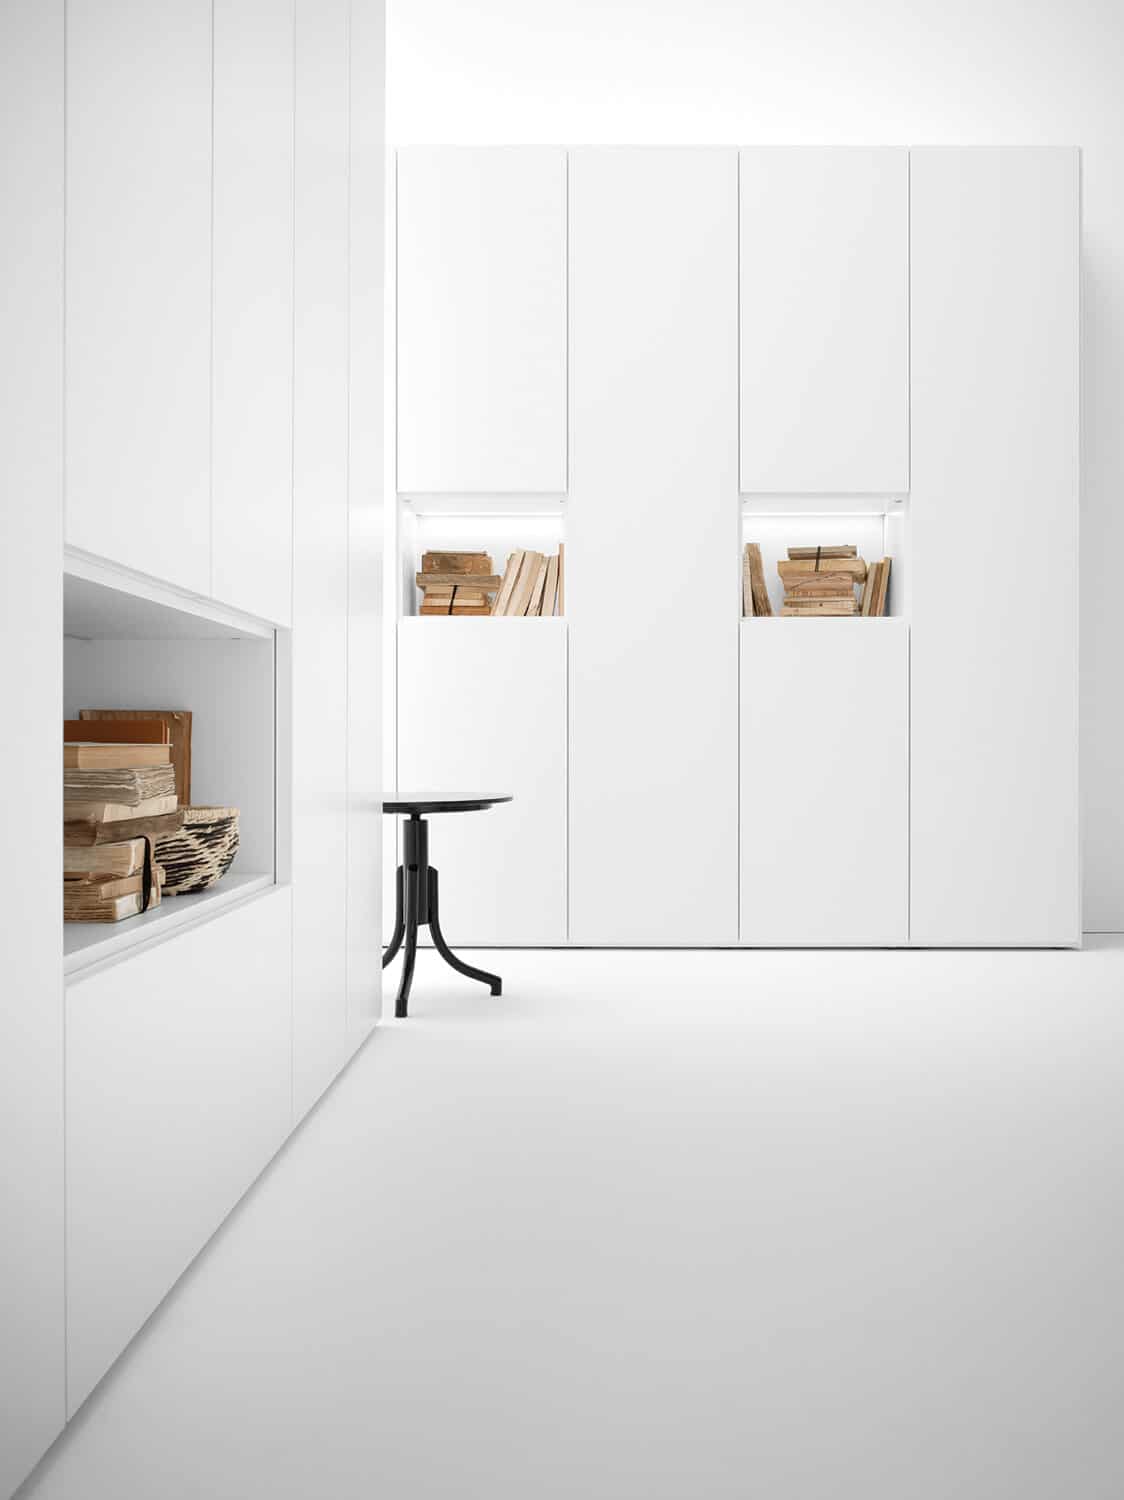 Grid closet with open compartments in two different widths. A solution that is not only functional but also allows you to add visual variety to the design.